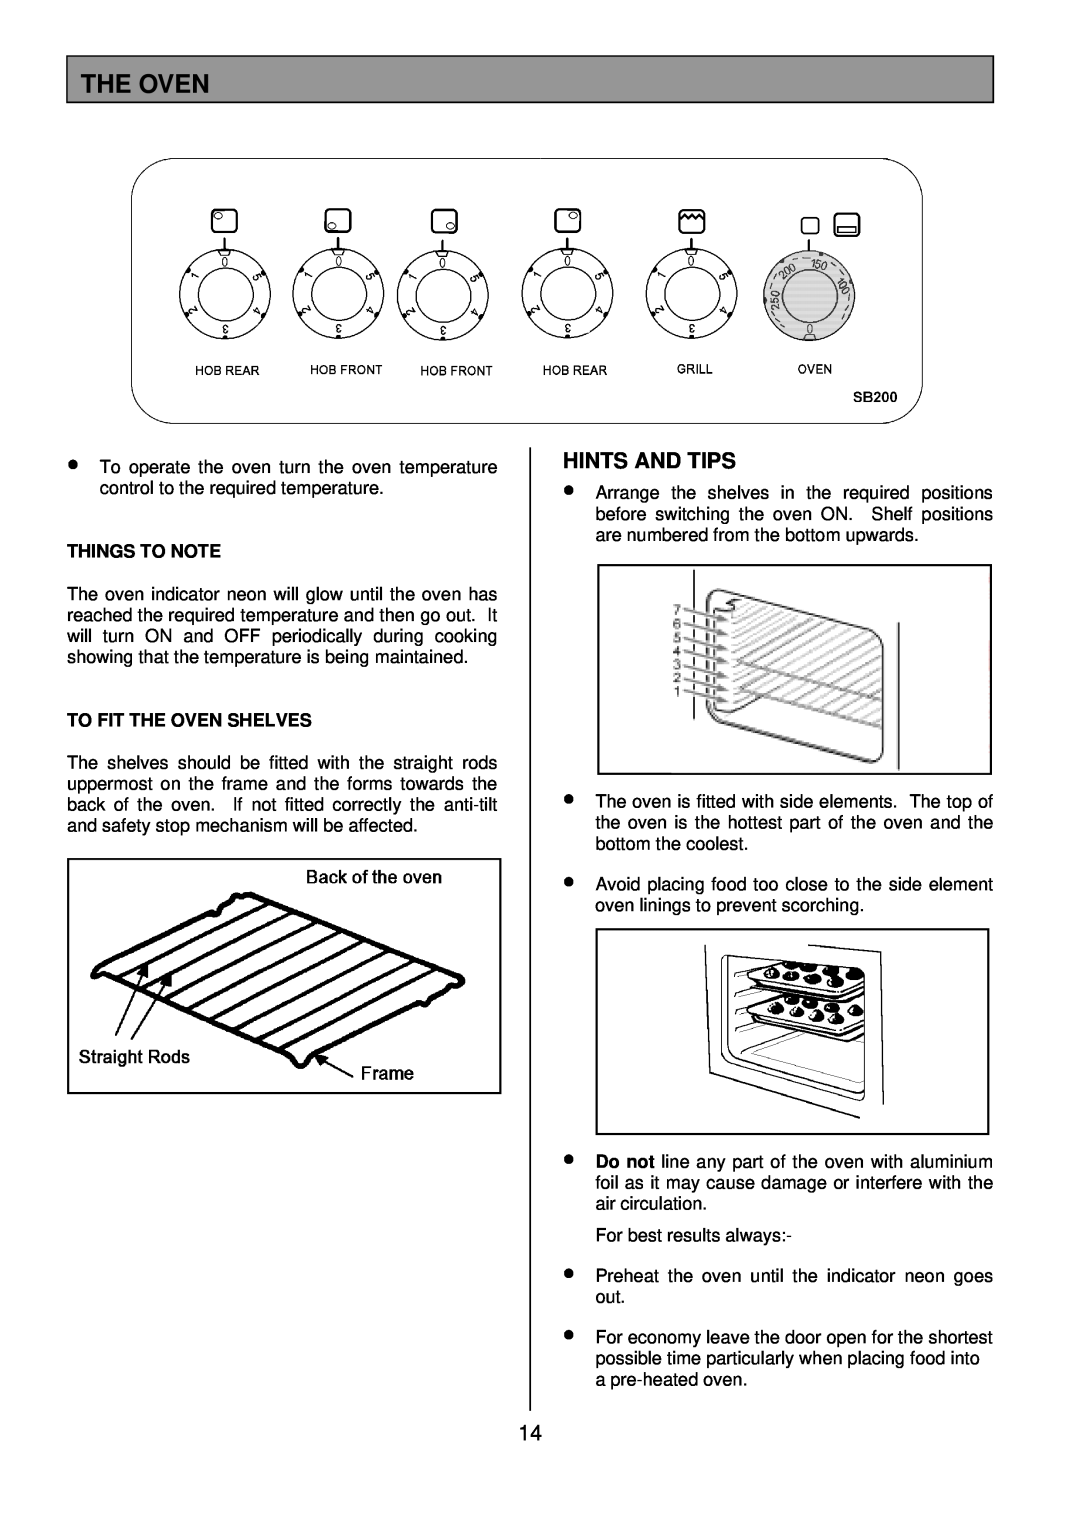 Tricity Bendix SB200 installation instructions Things To Note, To Fit The Oven Shelves 